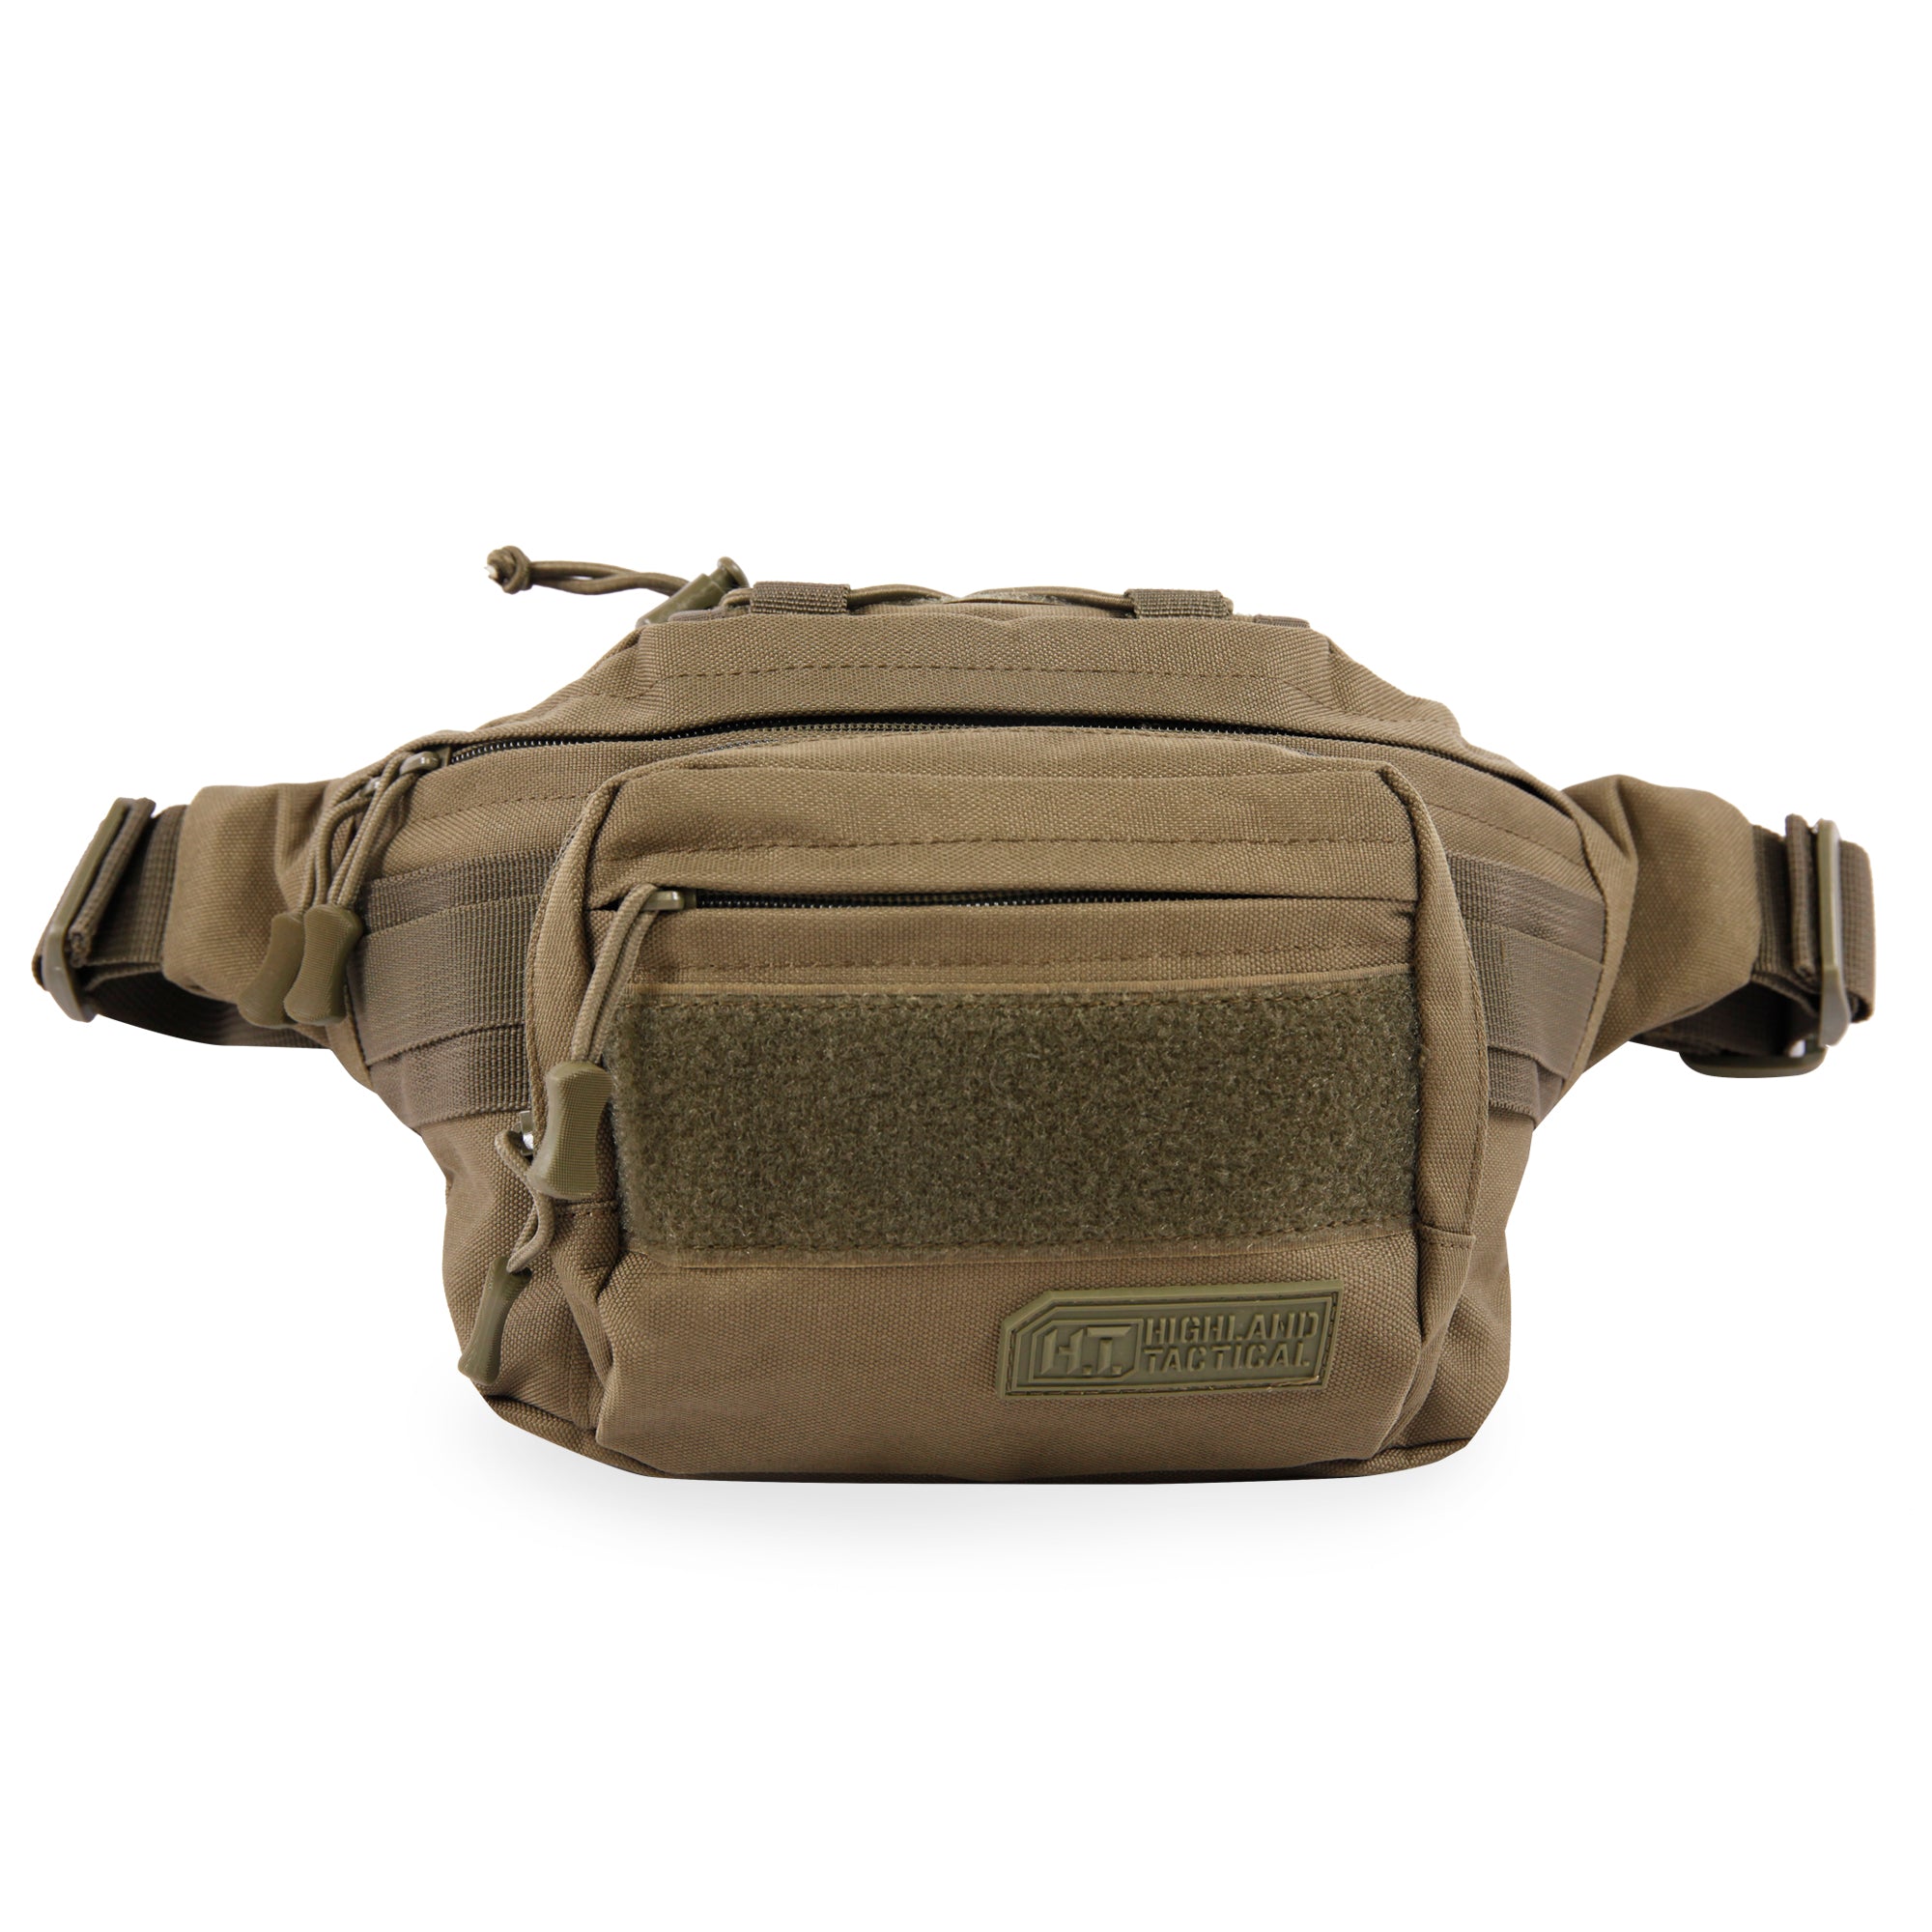 Mobility Waist Pack